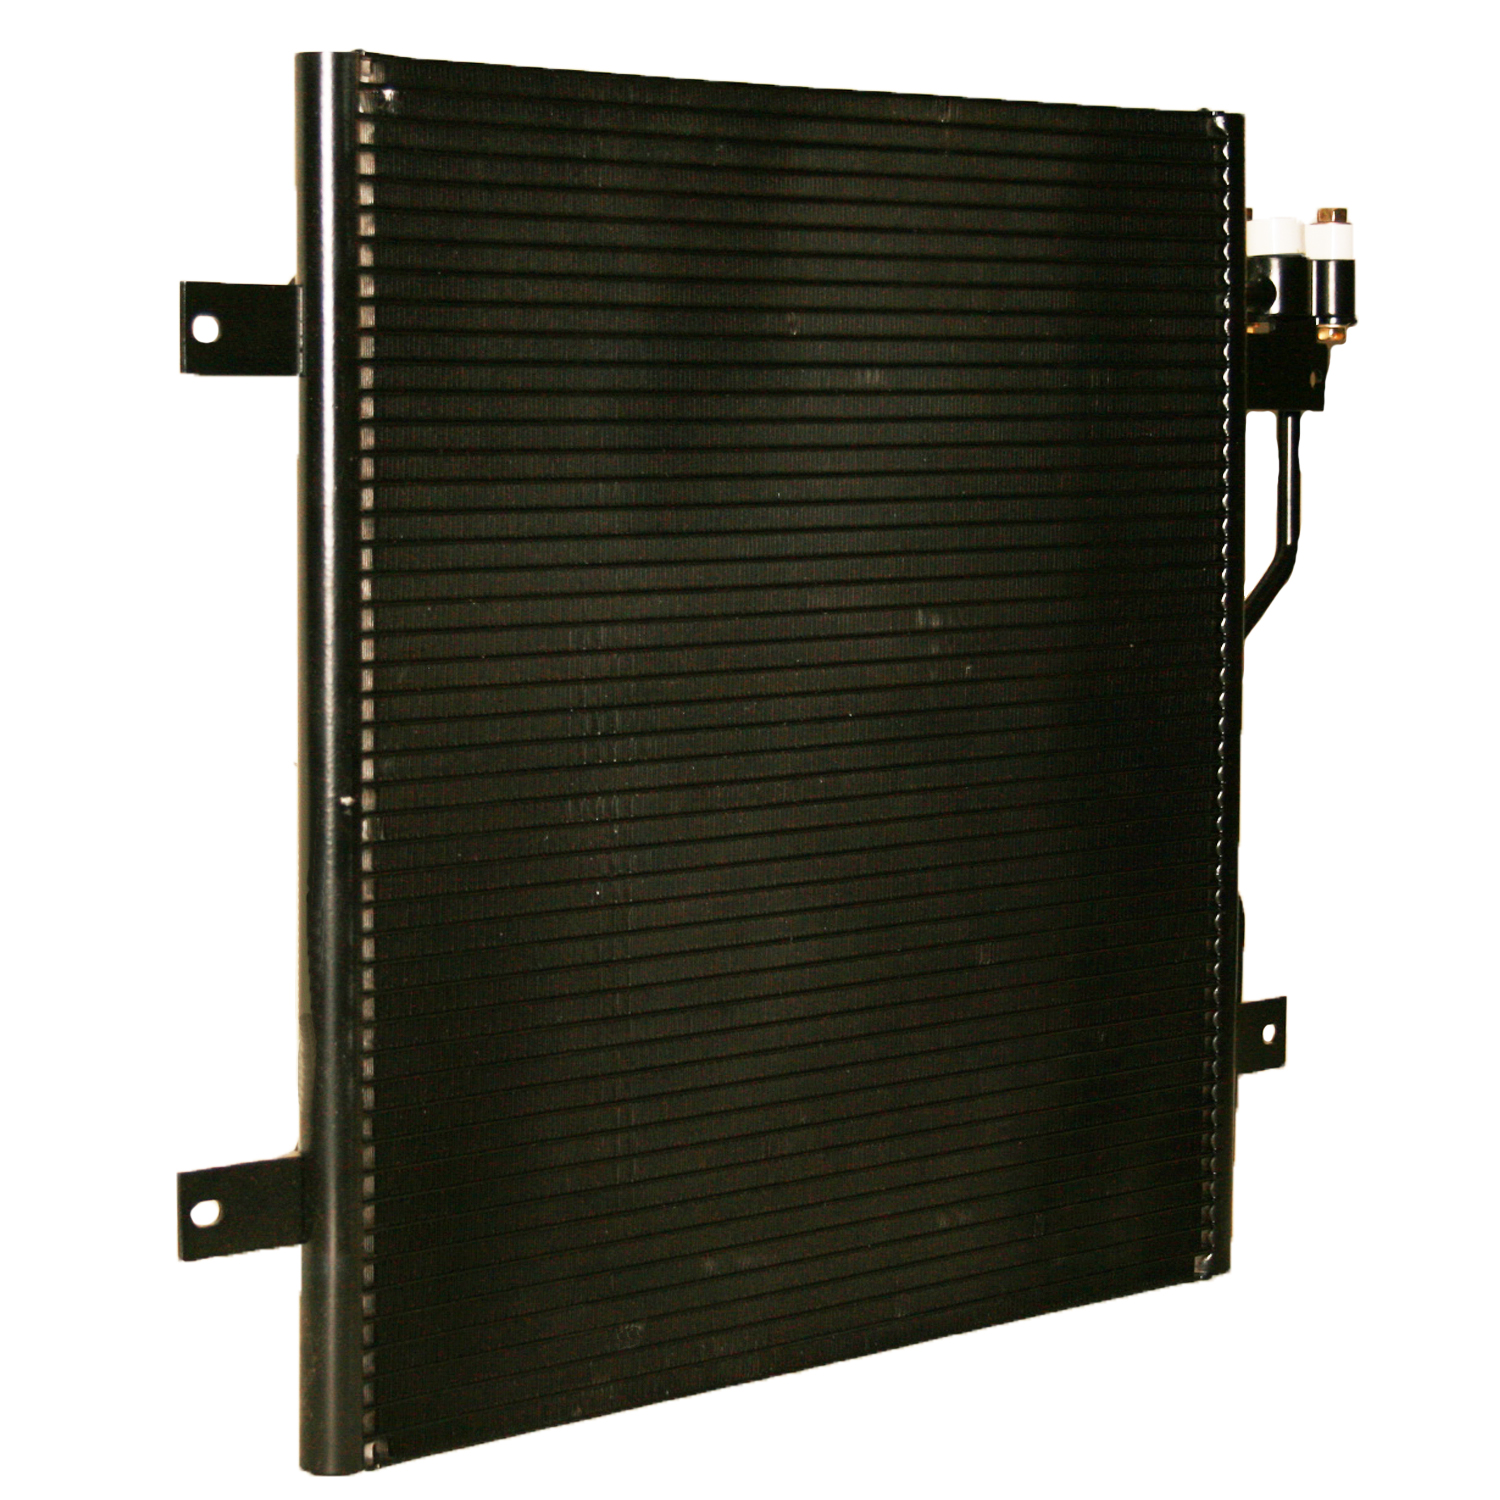 TCW Condenser 44-3596 New Product Image field_60b6a13a6e67c